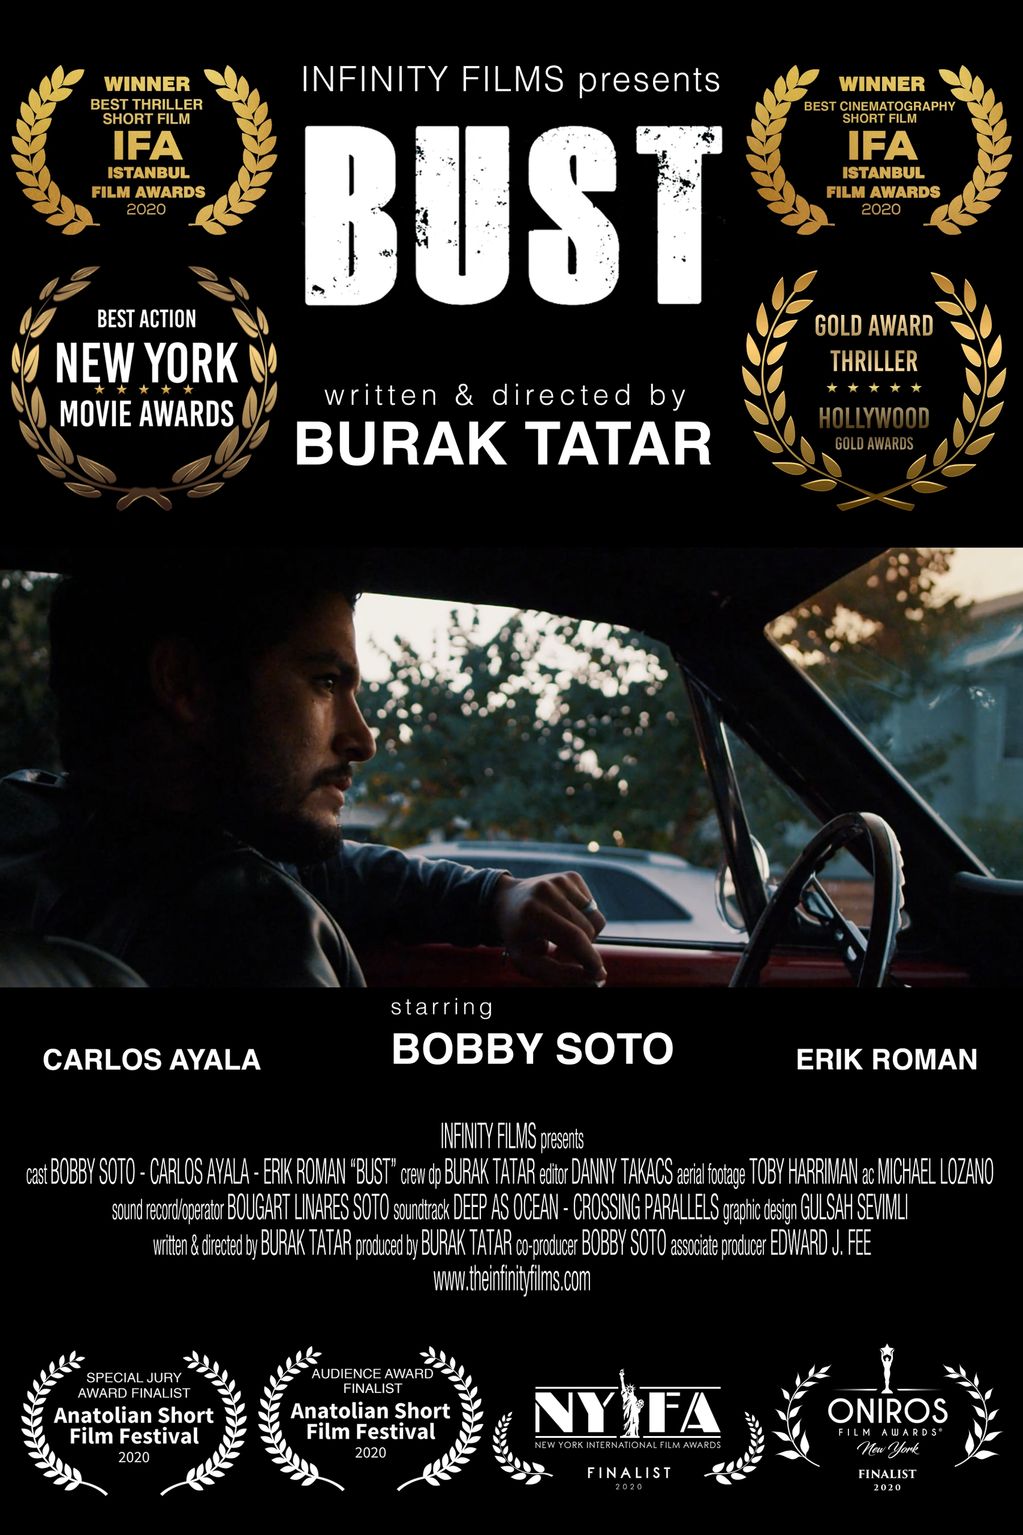 INFINITY FILMS presents BUST written & directed by Burak Tatar.